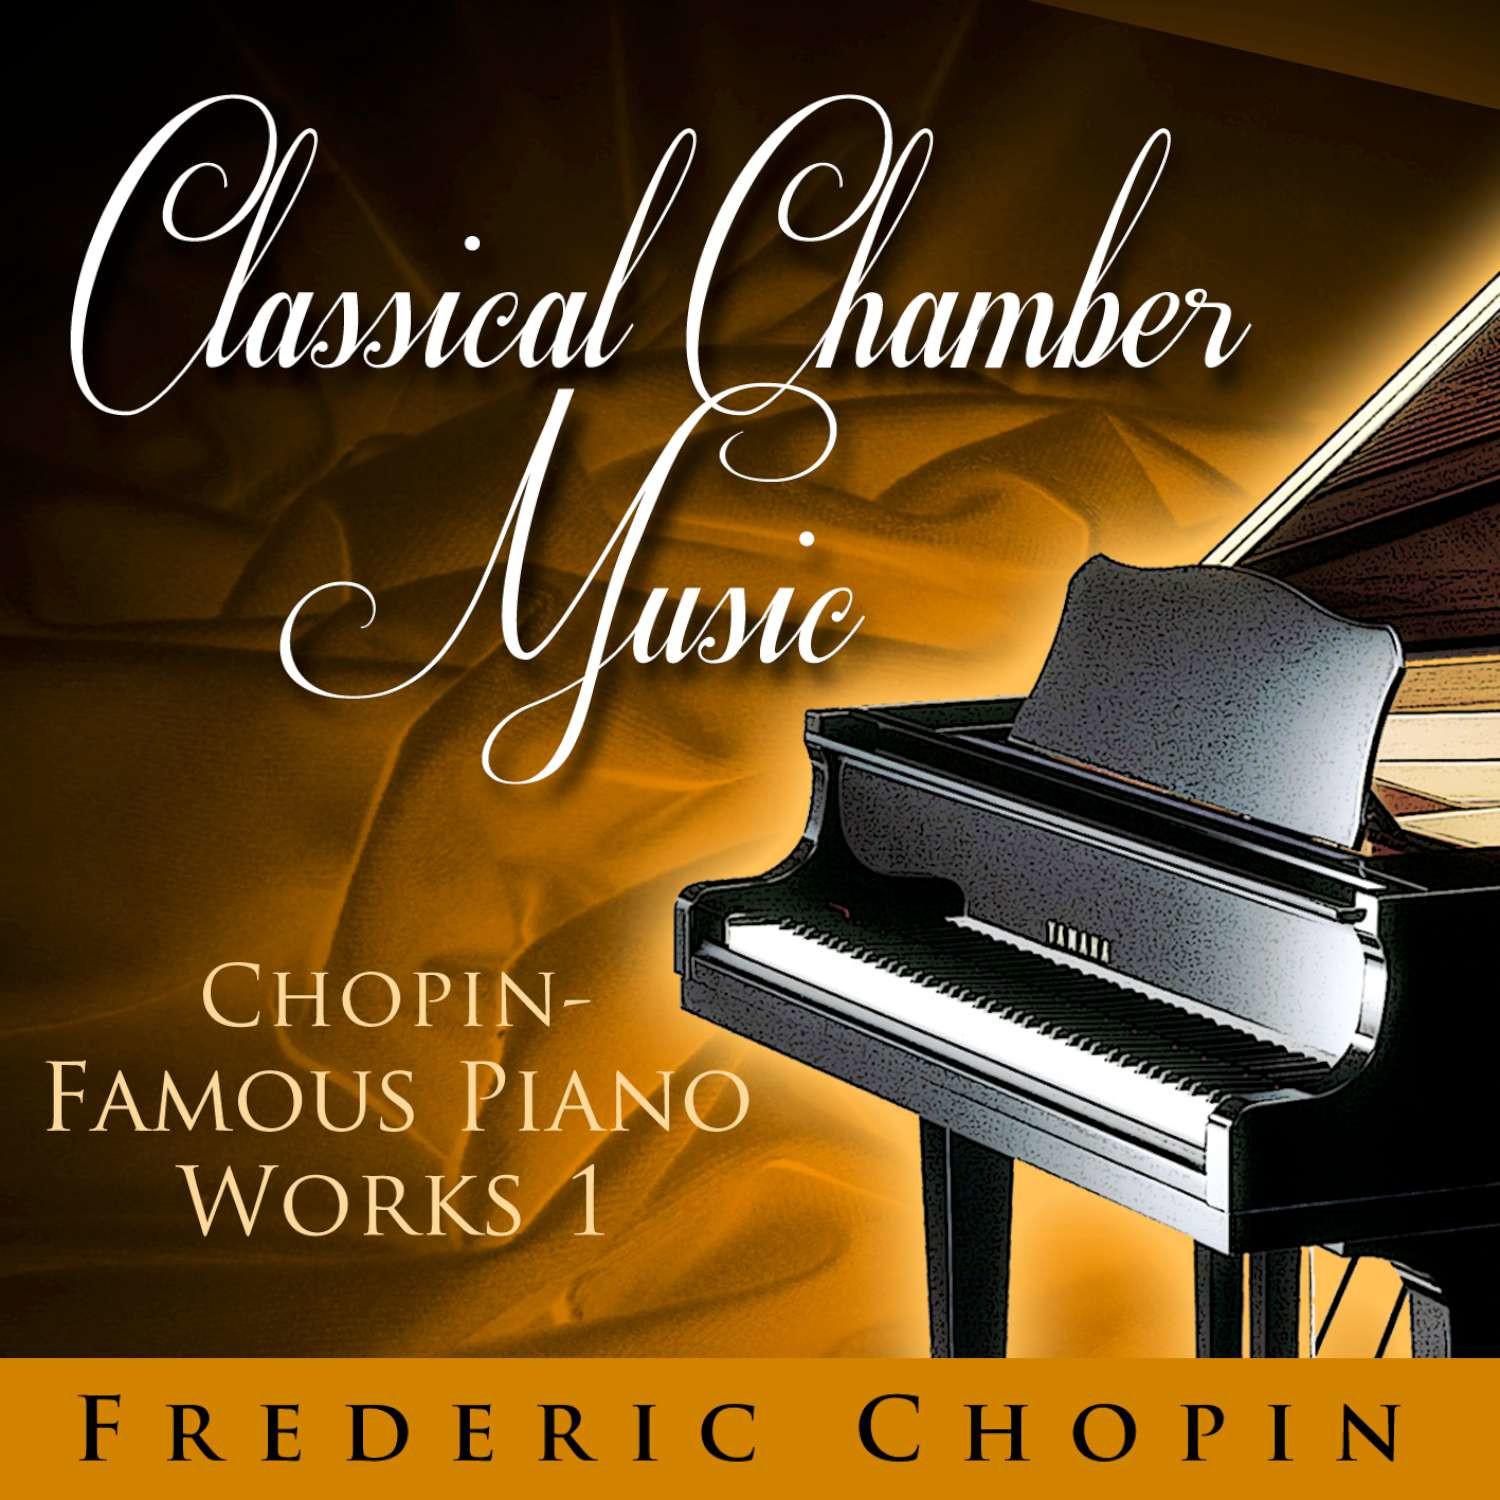 Classical Chamber Music - Chopin - Famous Piano Works 1